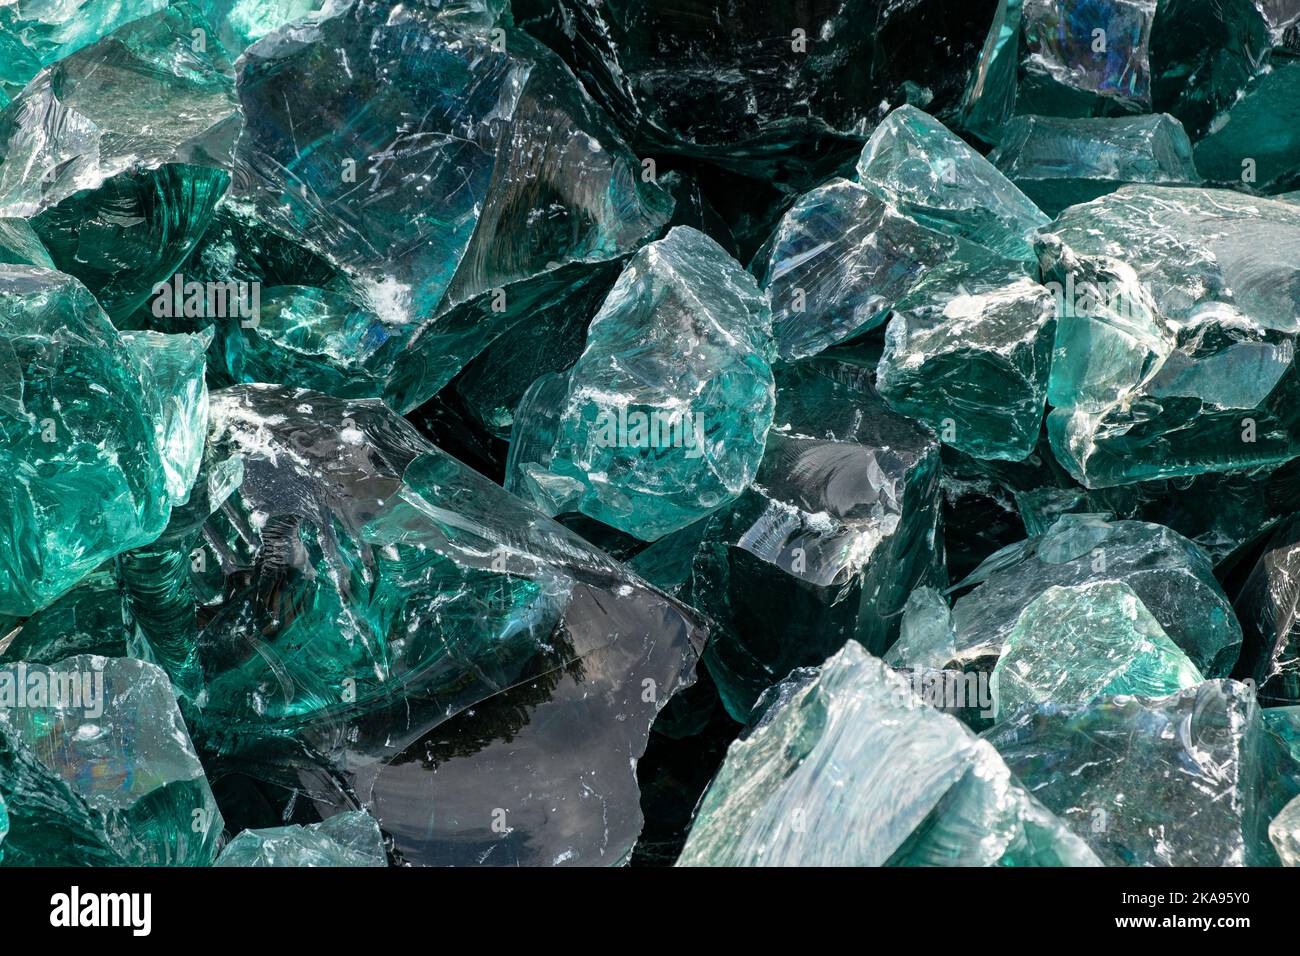 Heap of large Chunk of Aqua Glass Rock Slag for Garden decor. Glass in Nature Full frame texture top view Stock Photo